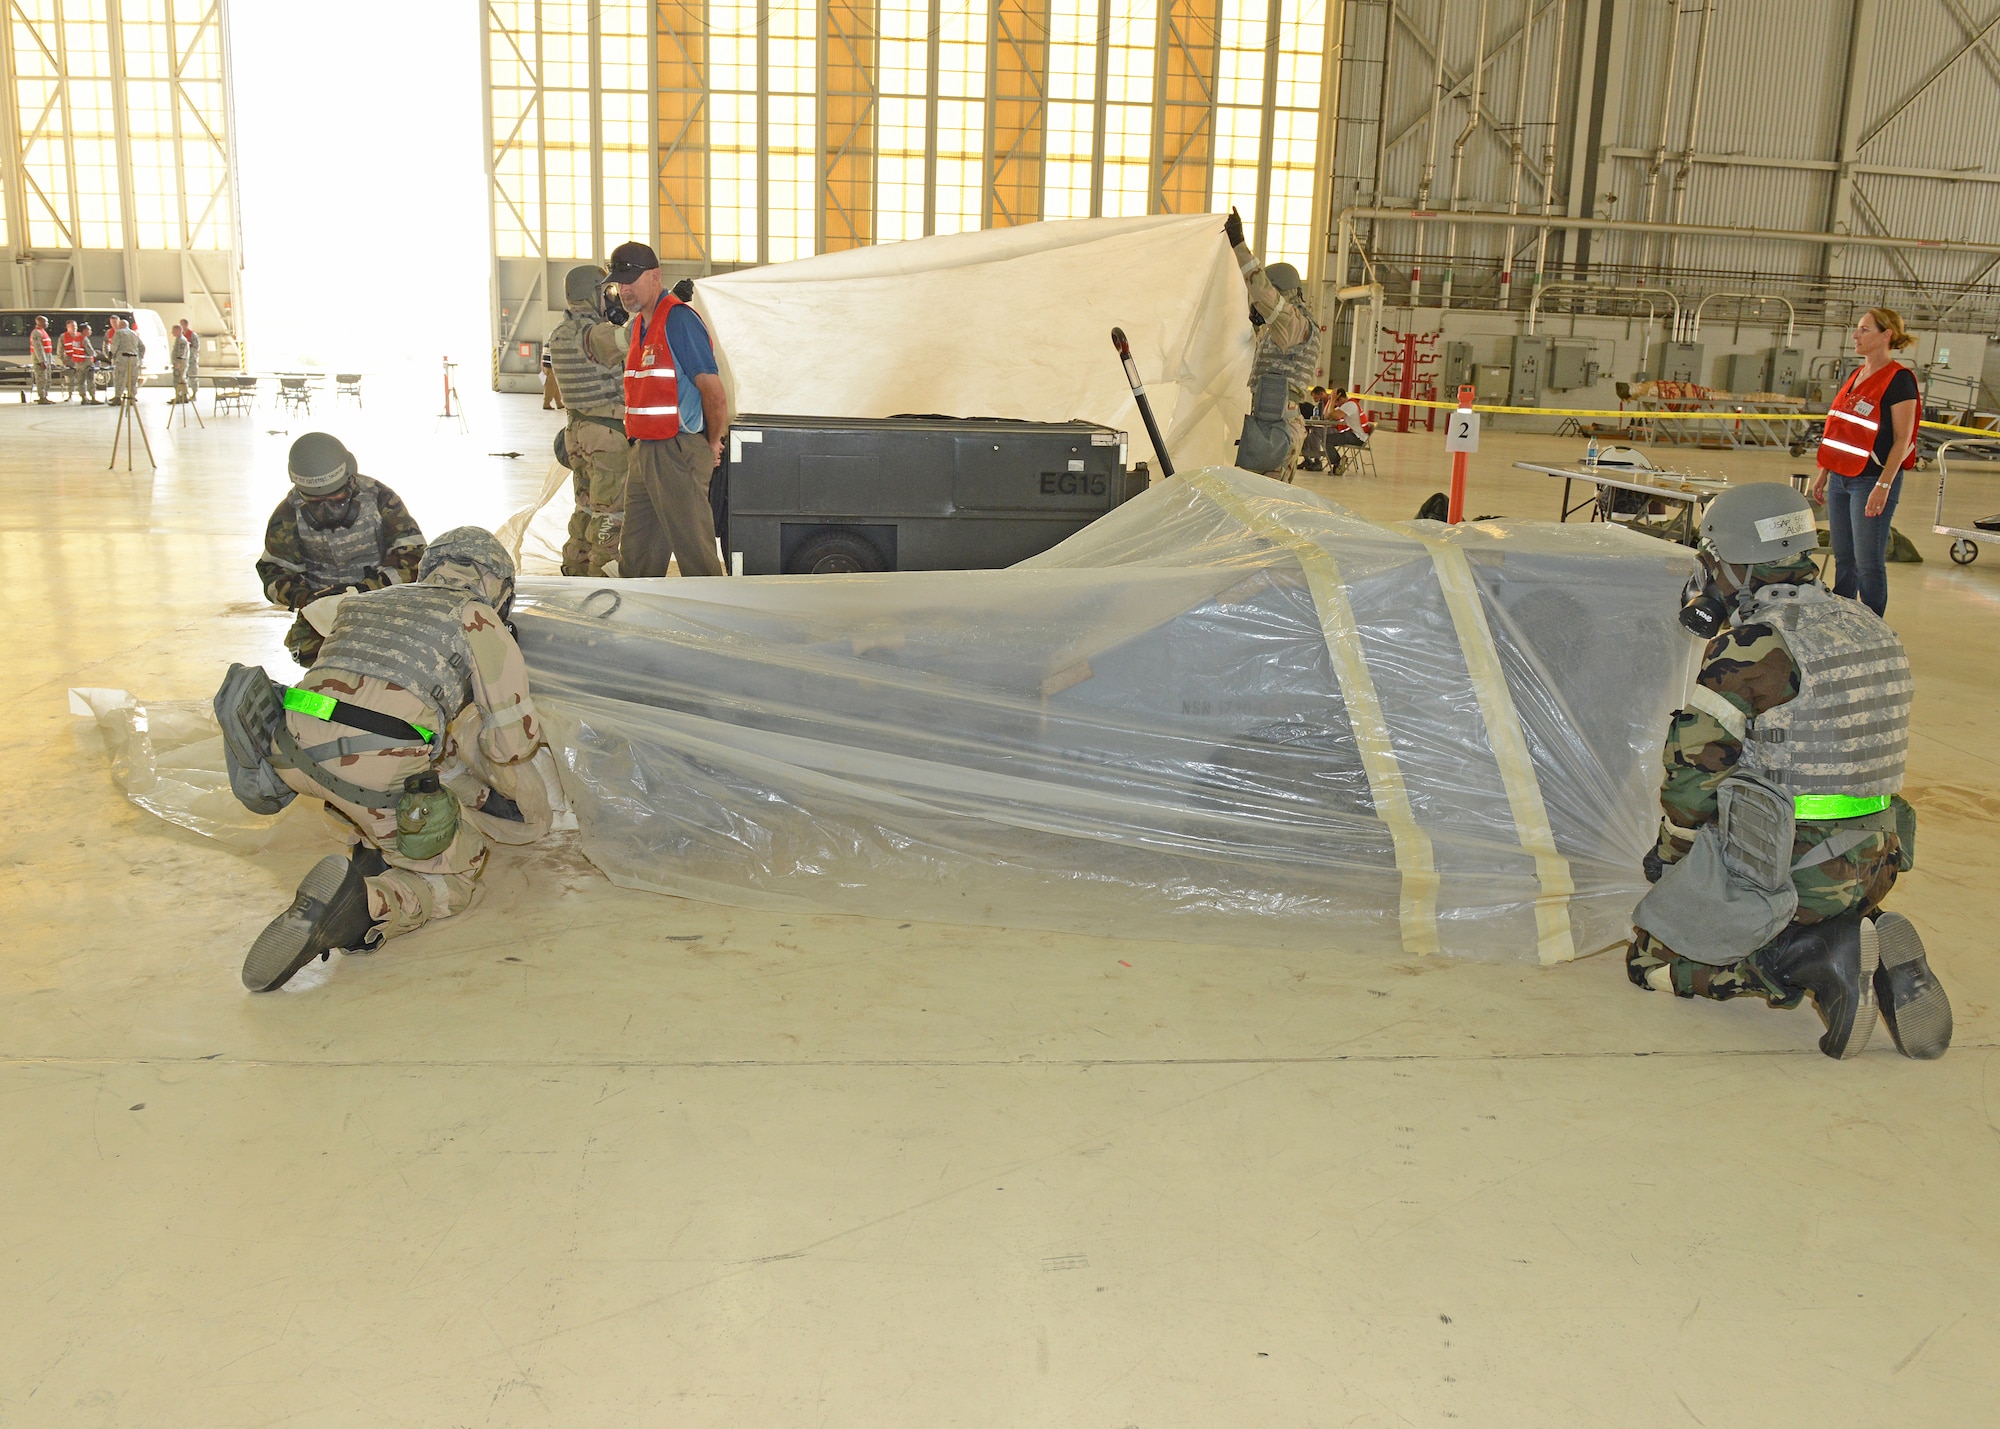 Airmen wearing their mission oriented protective posture, or MOPP gear, wrap plastic over a jammer weapons loader to simulate protecting the equipment from chemical, biological and nuclear elements. This was one station in Hangar 1600 part of Test Wing Readiness Exercise 18-03, Aug. 9. (U.S. Air Force photo by Kenji Thuloweit)